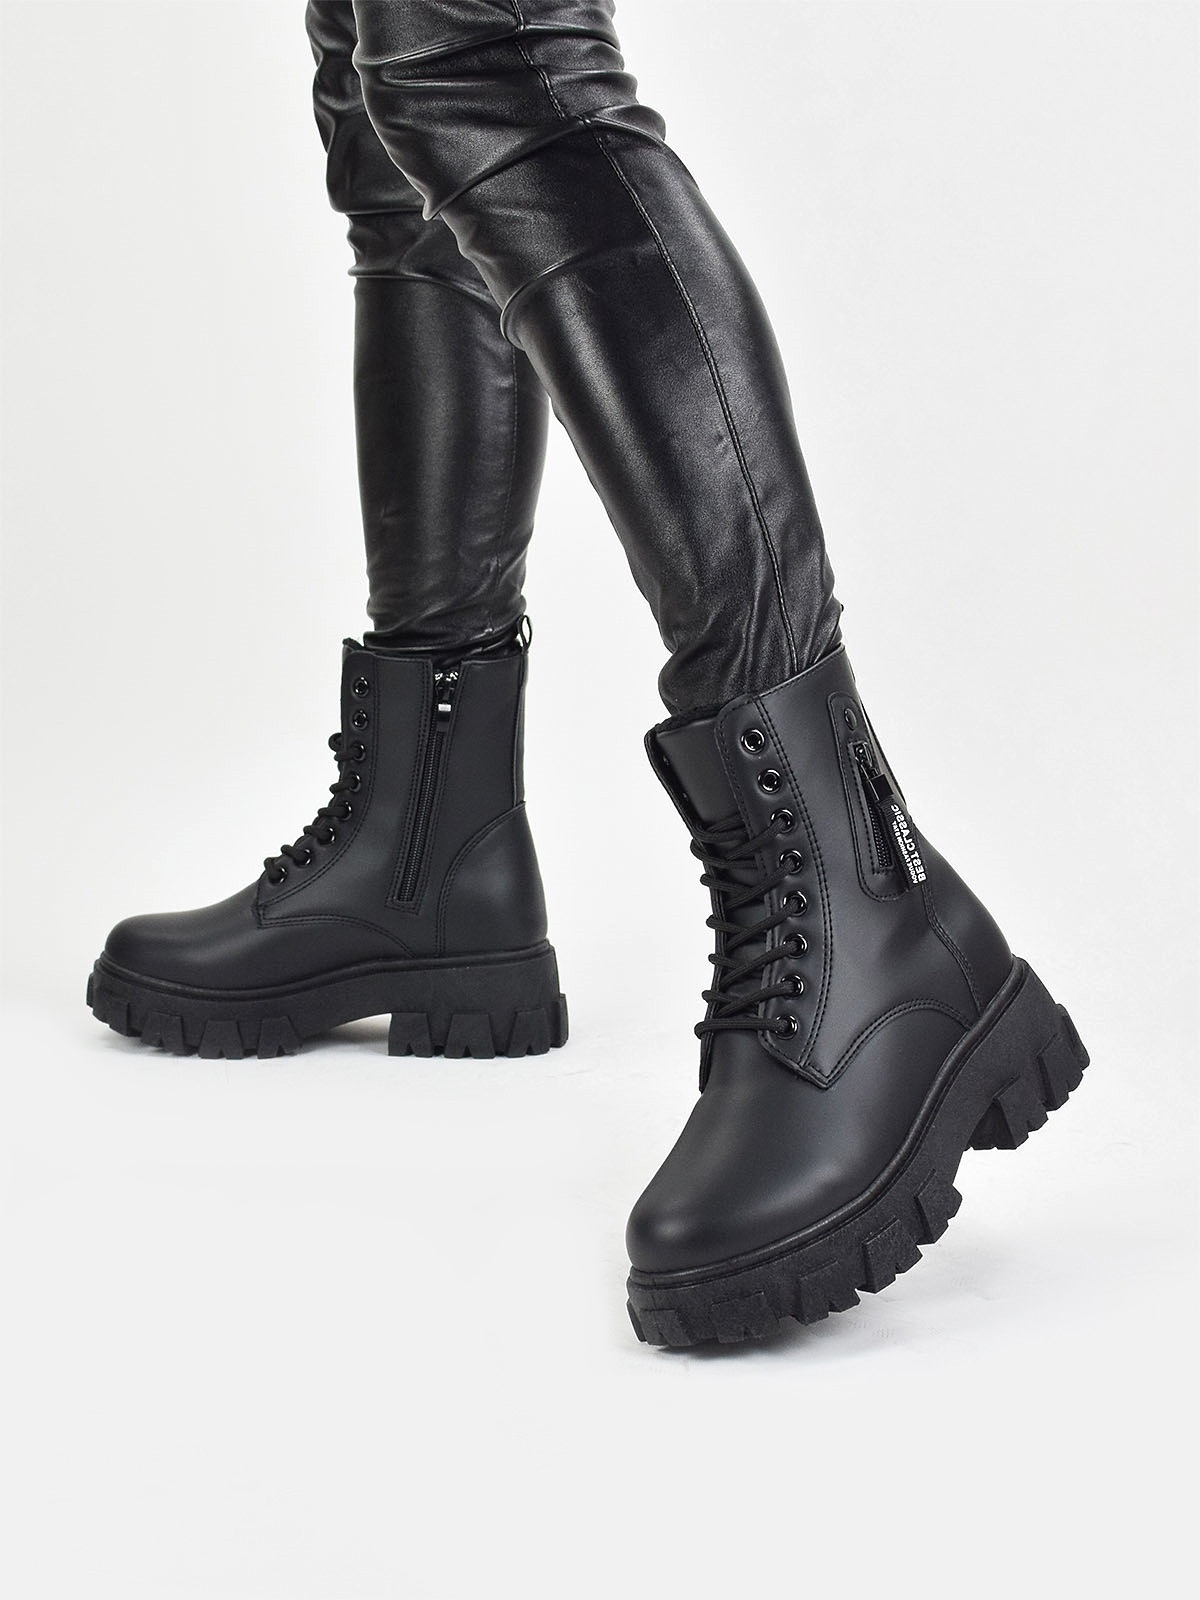 Classic design lace up ankle boots with side zip detail in black